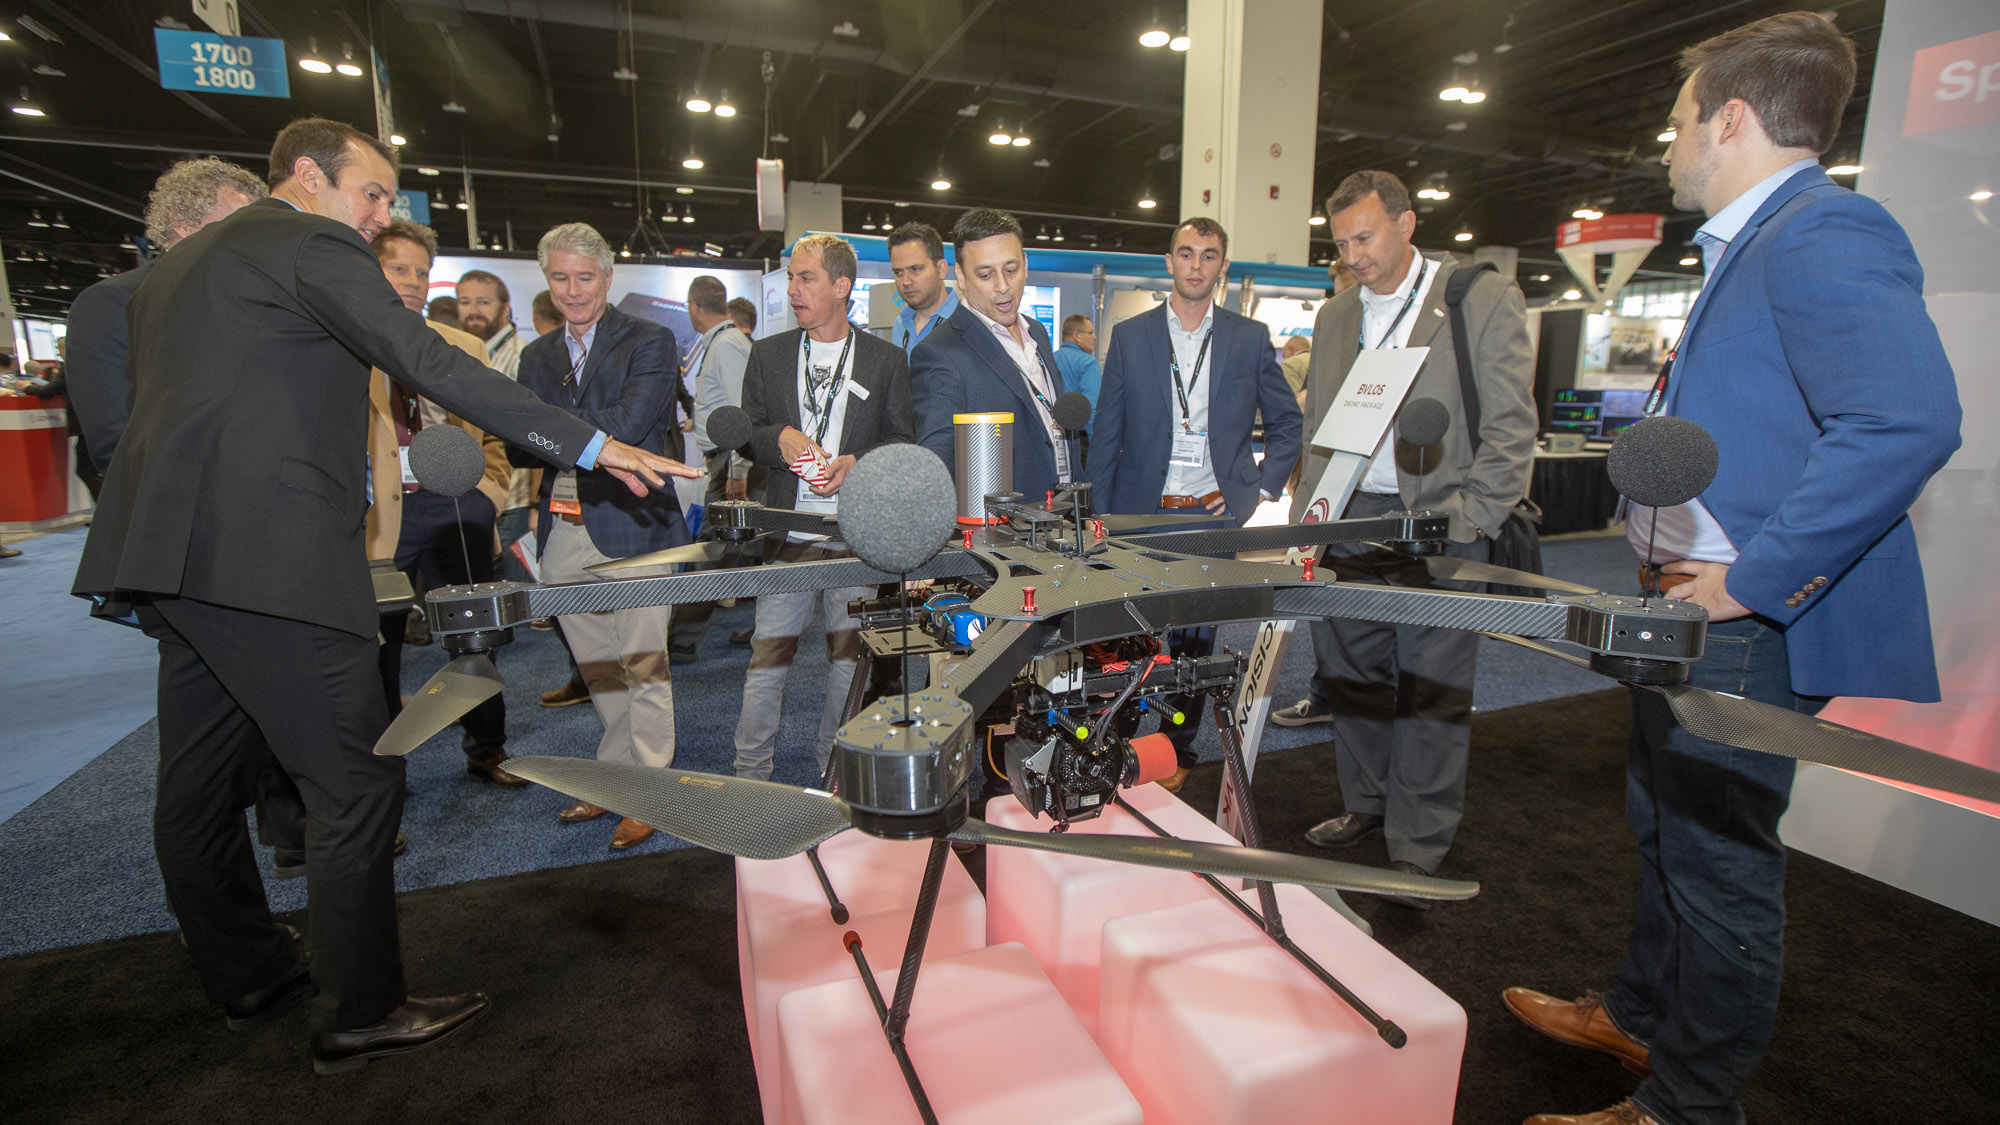 PrecisionHawk CEO Michael Chasen (center) briefs visitors about the company's efforts to facilitate drone flight beyond visual line of sight with an acoustic detection system to allow the drone to automatically avoid manned aircraft. Microphones mounted on top of the motors are part of this system. Photo by Jim Moore.